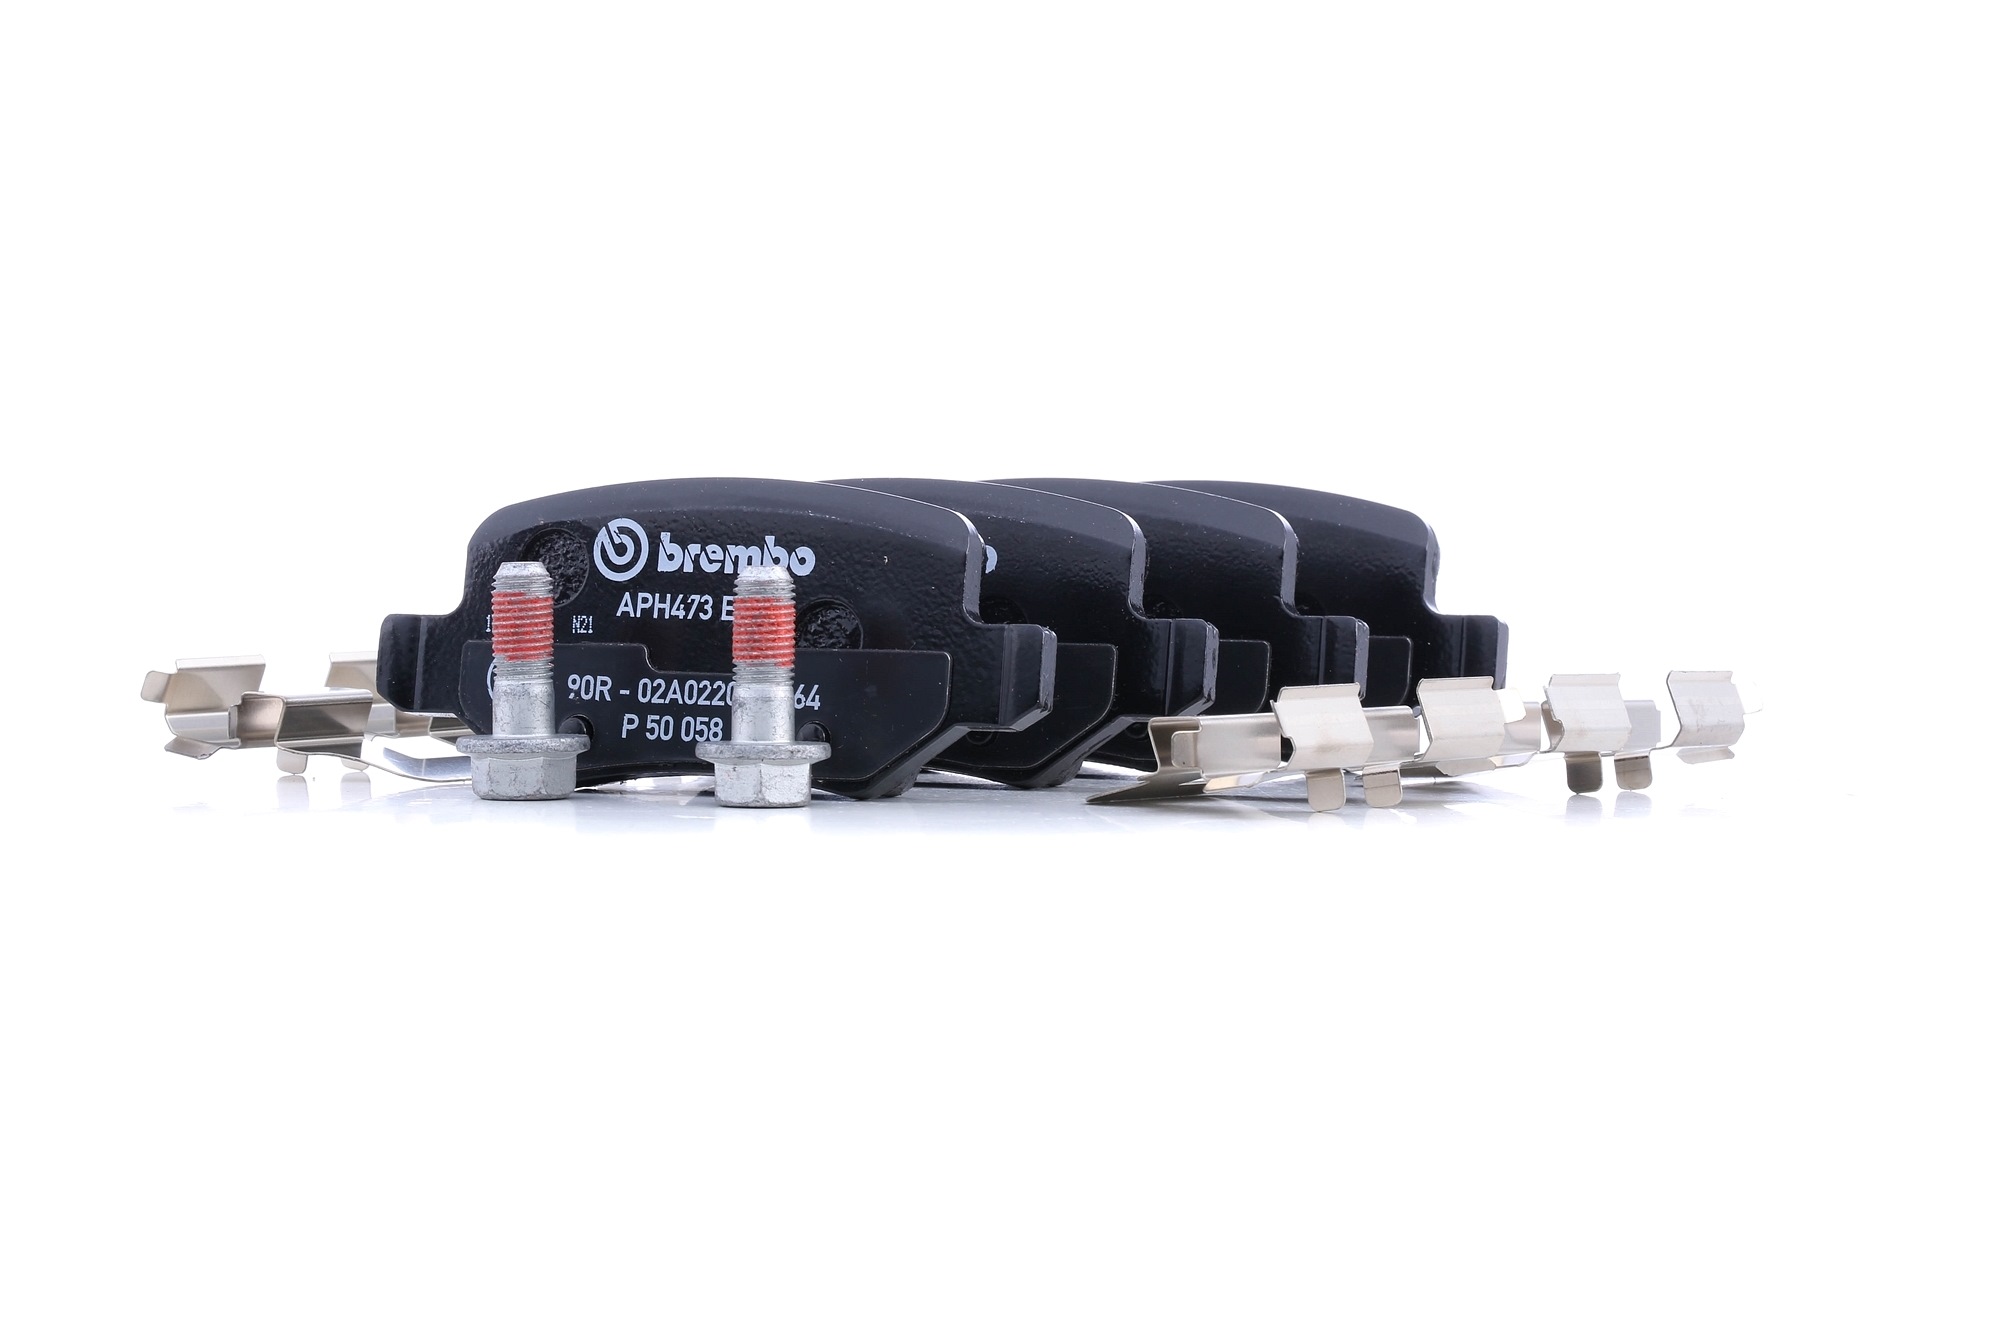 BREMBO P 50 058 Brake pad set excl. wear warning contact, with brake caliper screws, with accessories